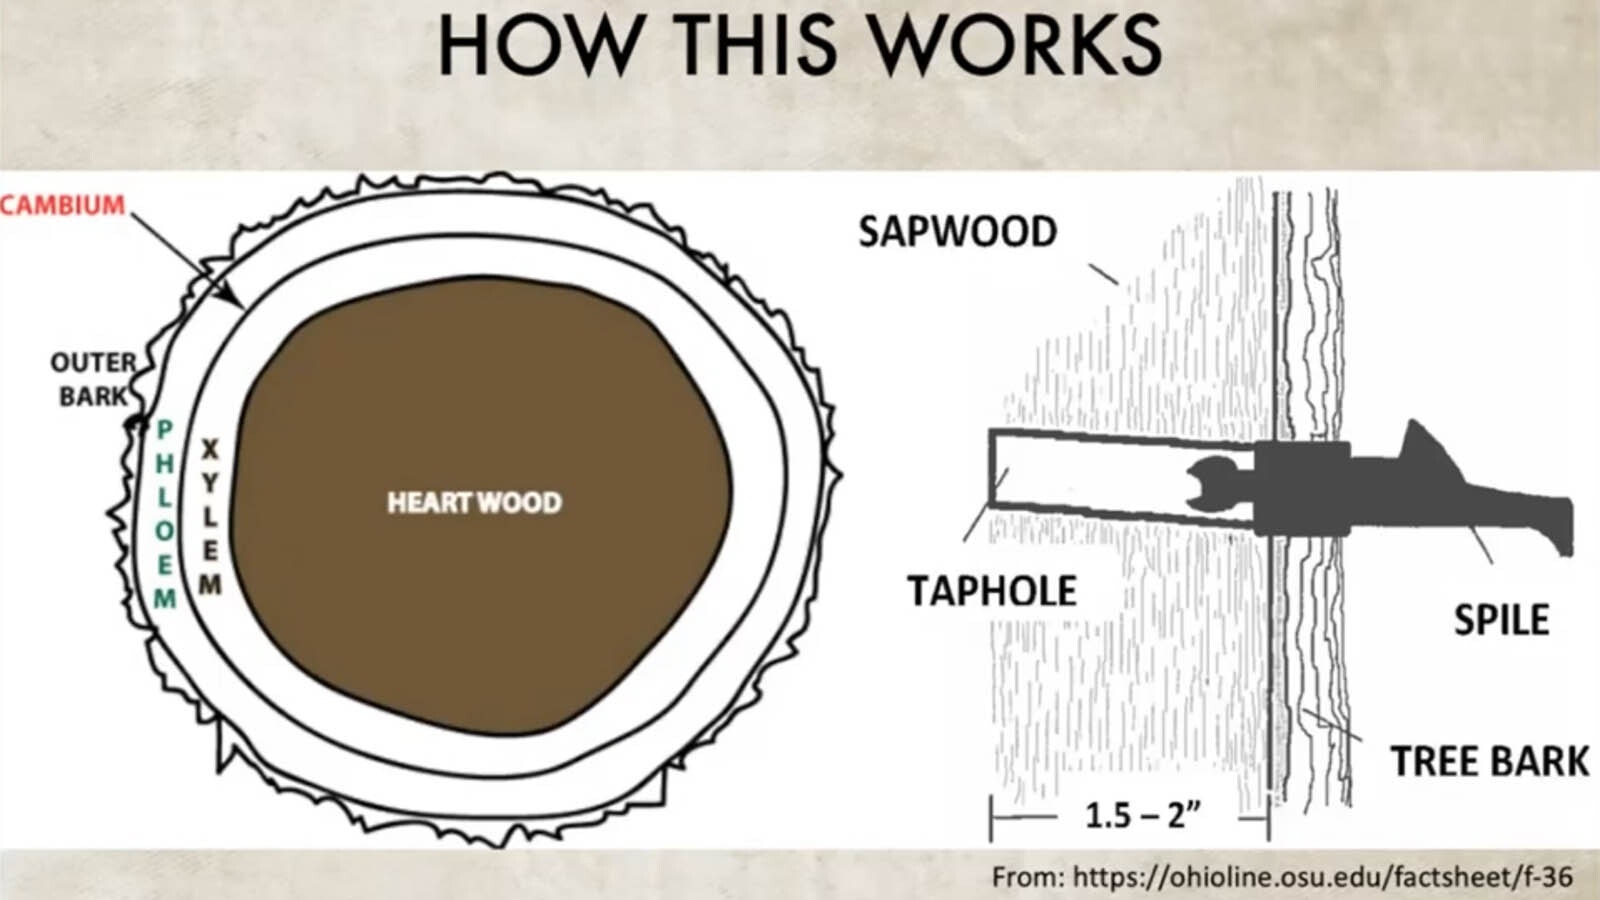 And illustration showing how tapping a tree works.